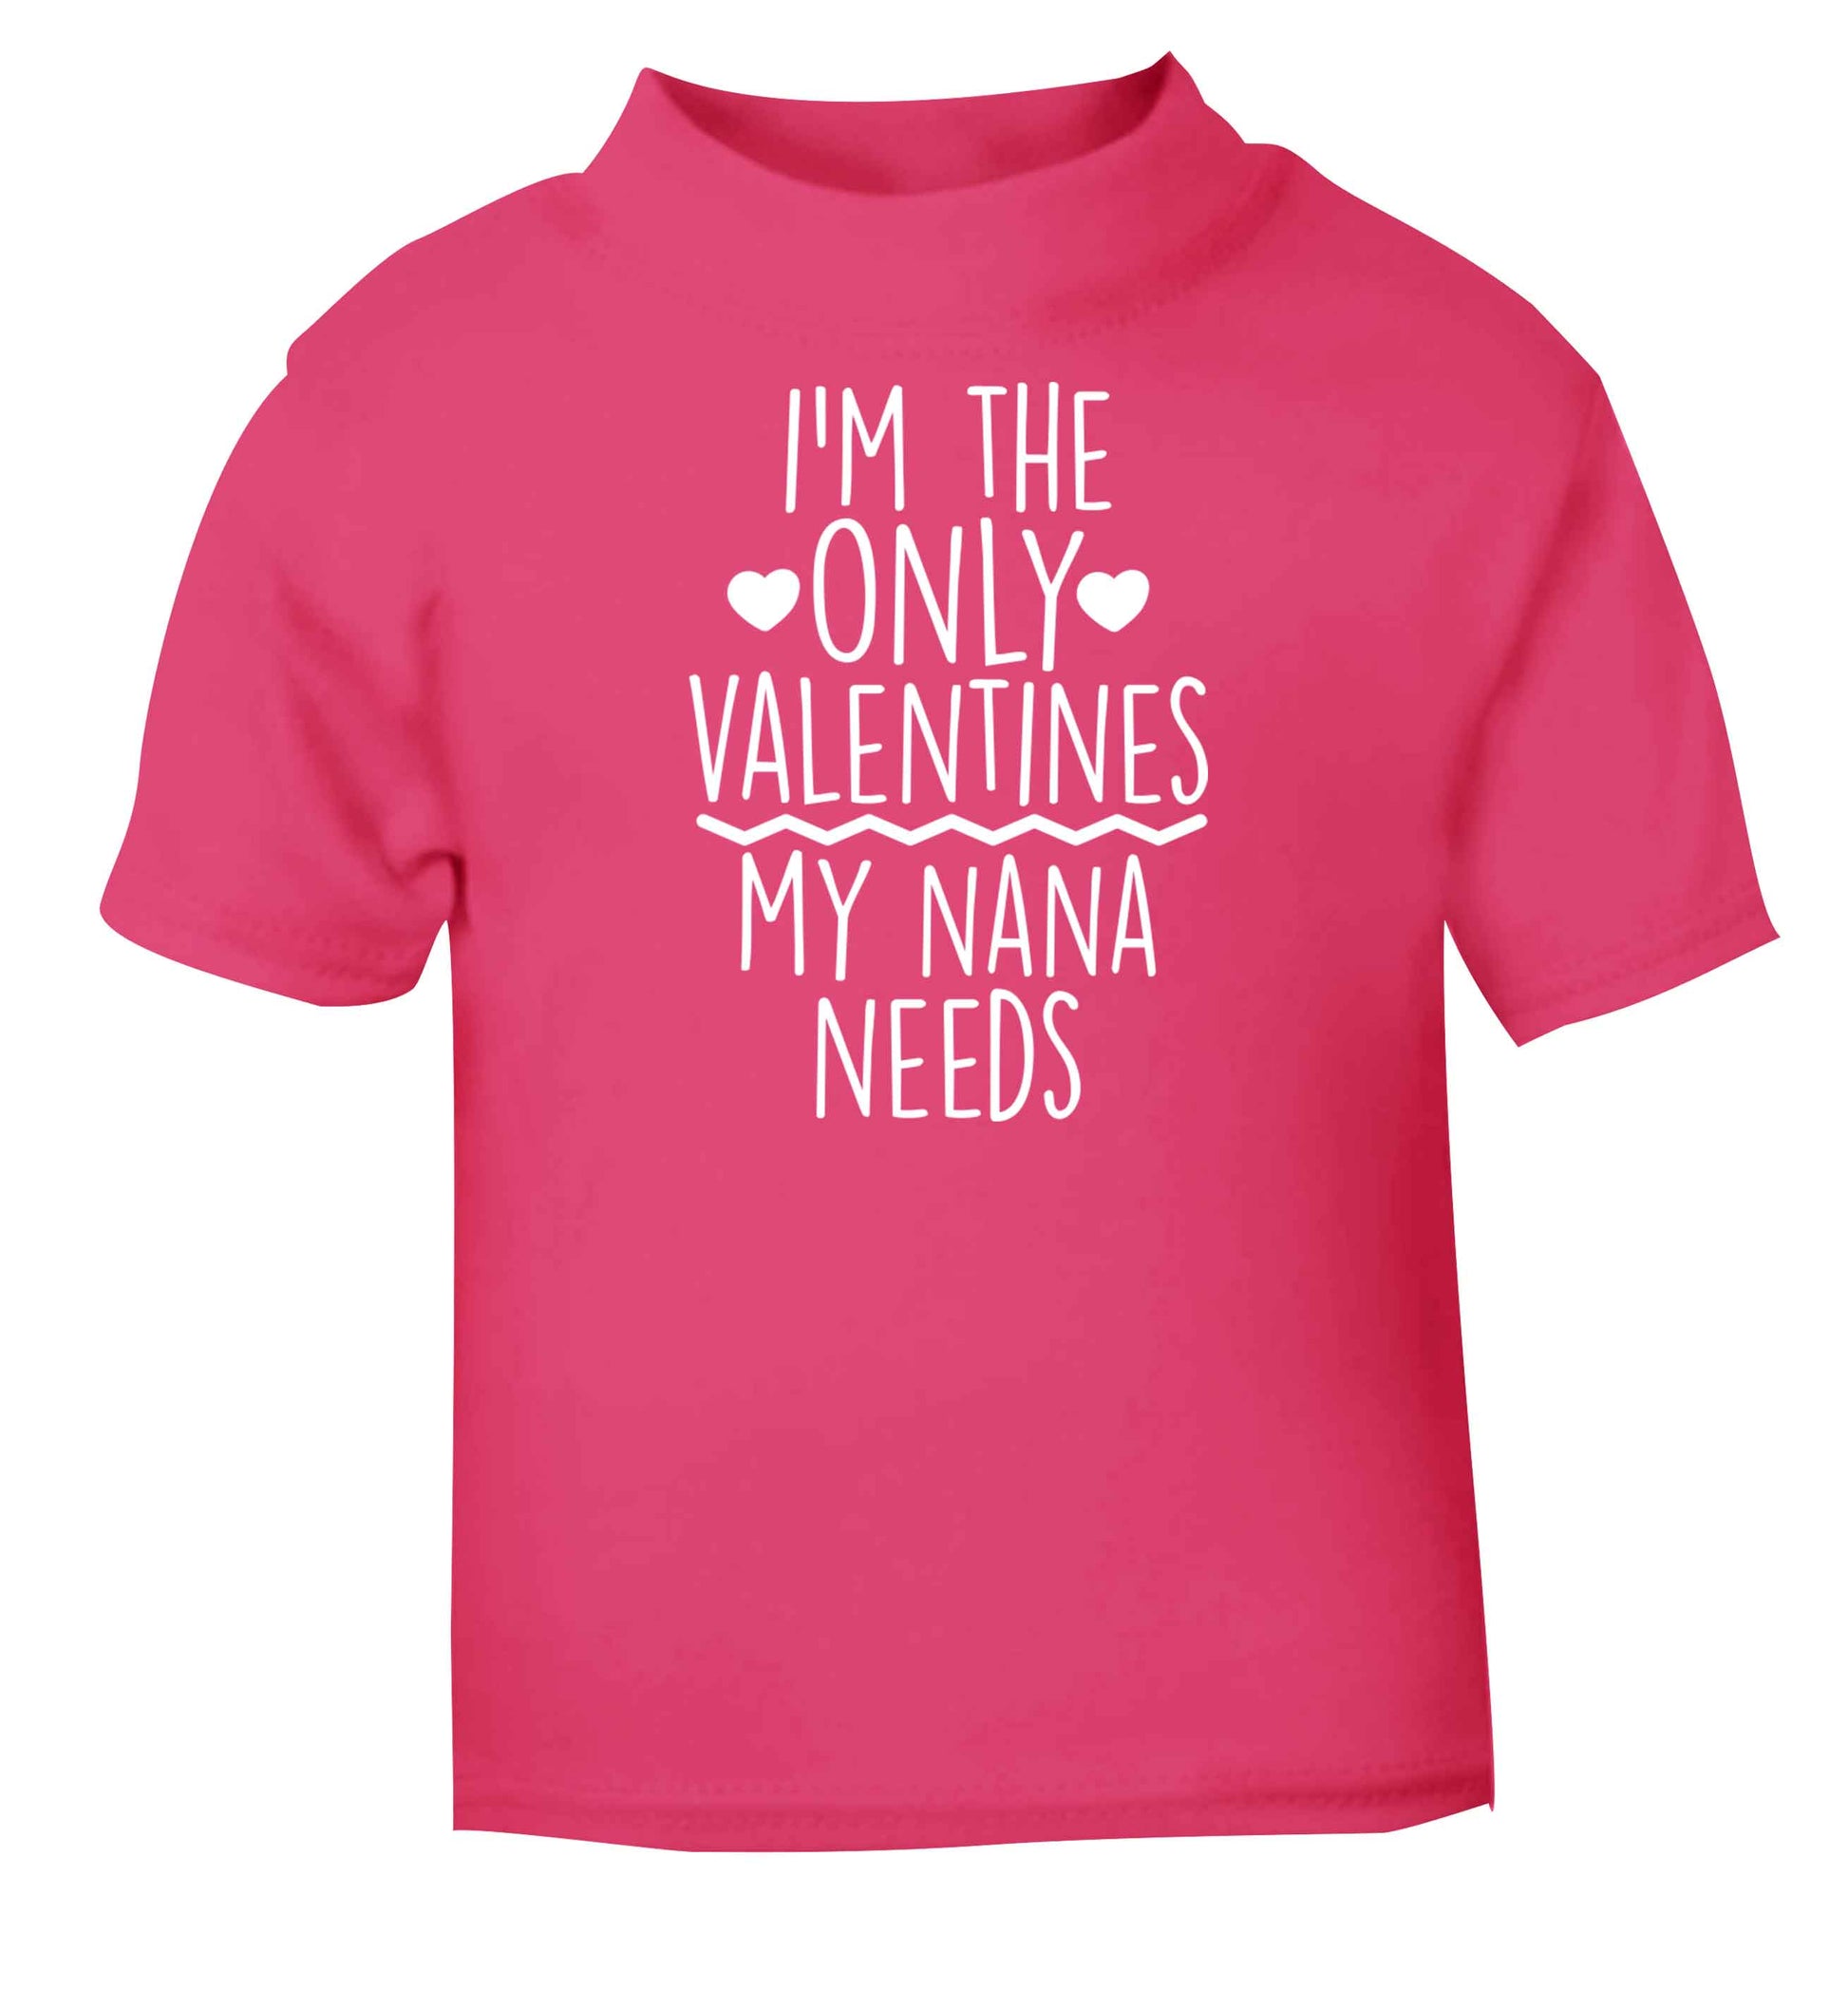 I'm the only valentines my nana needs pink baby toddler Tshirt 2 Years